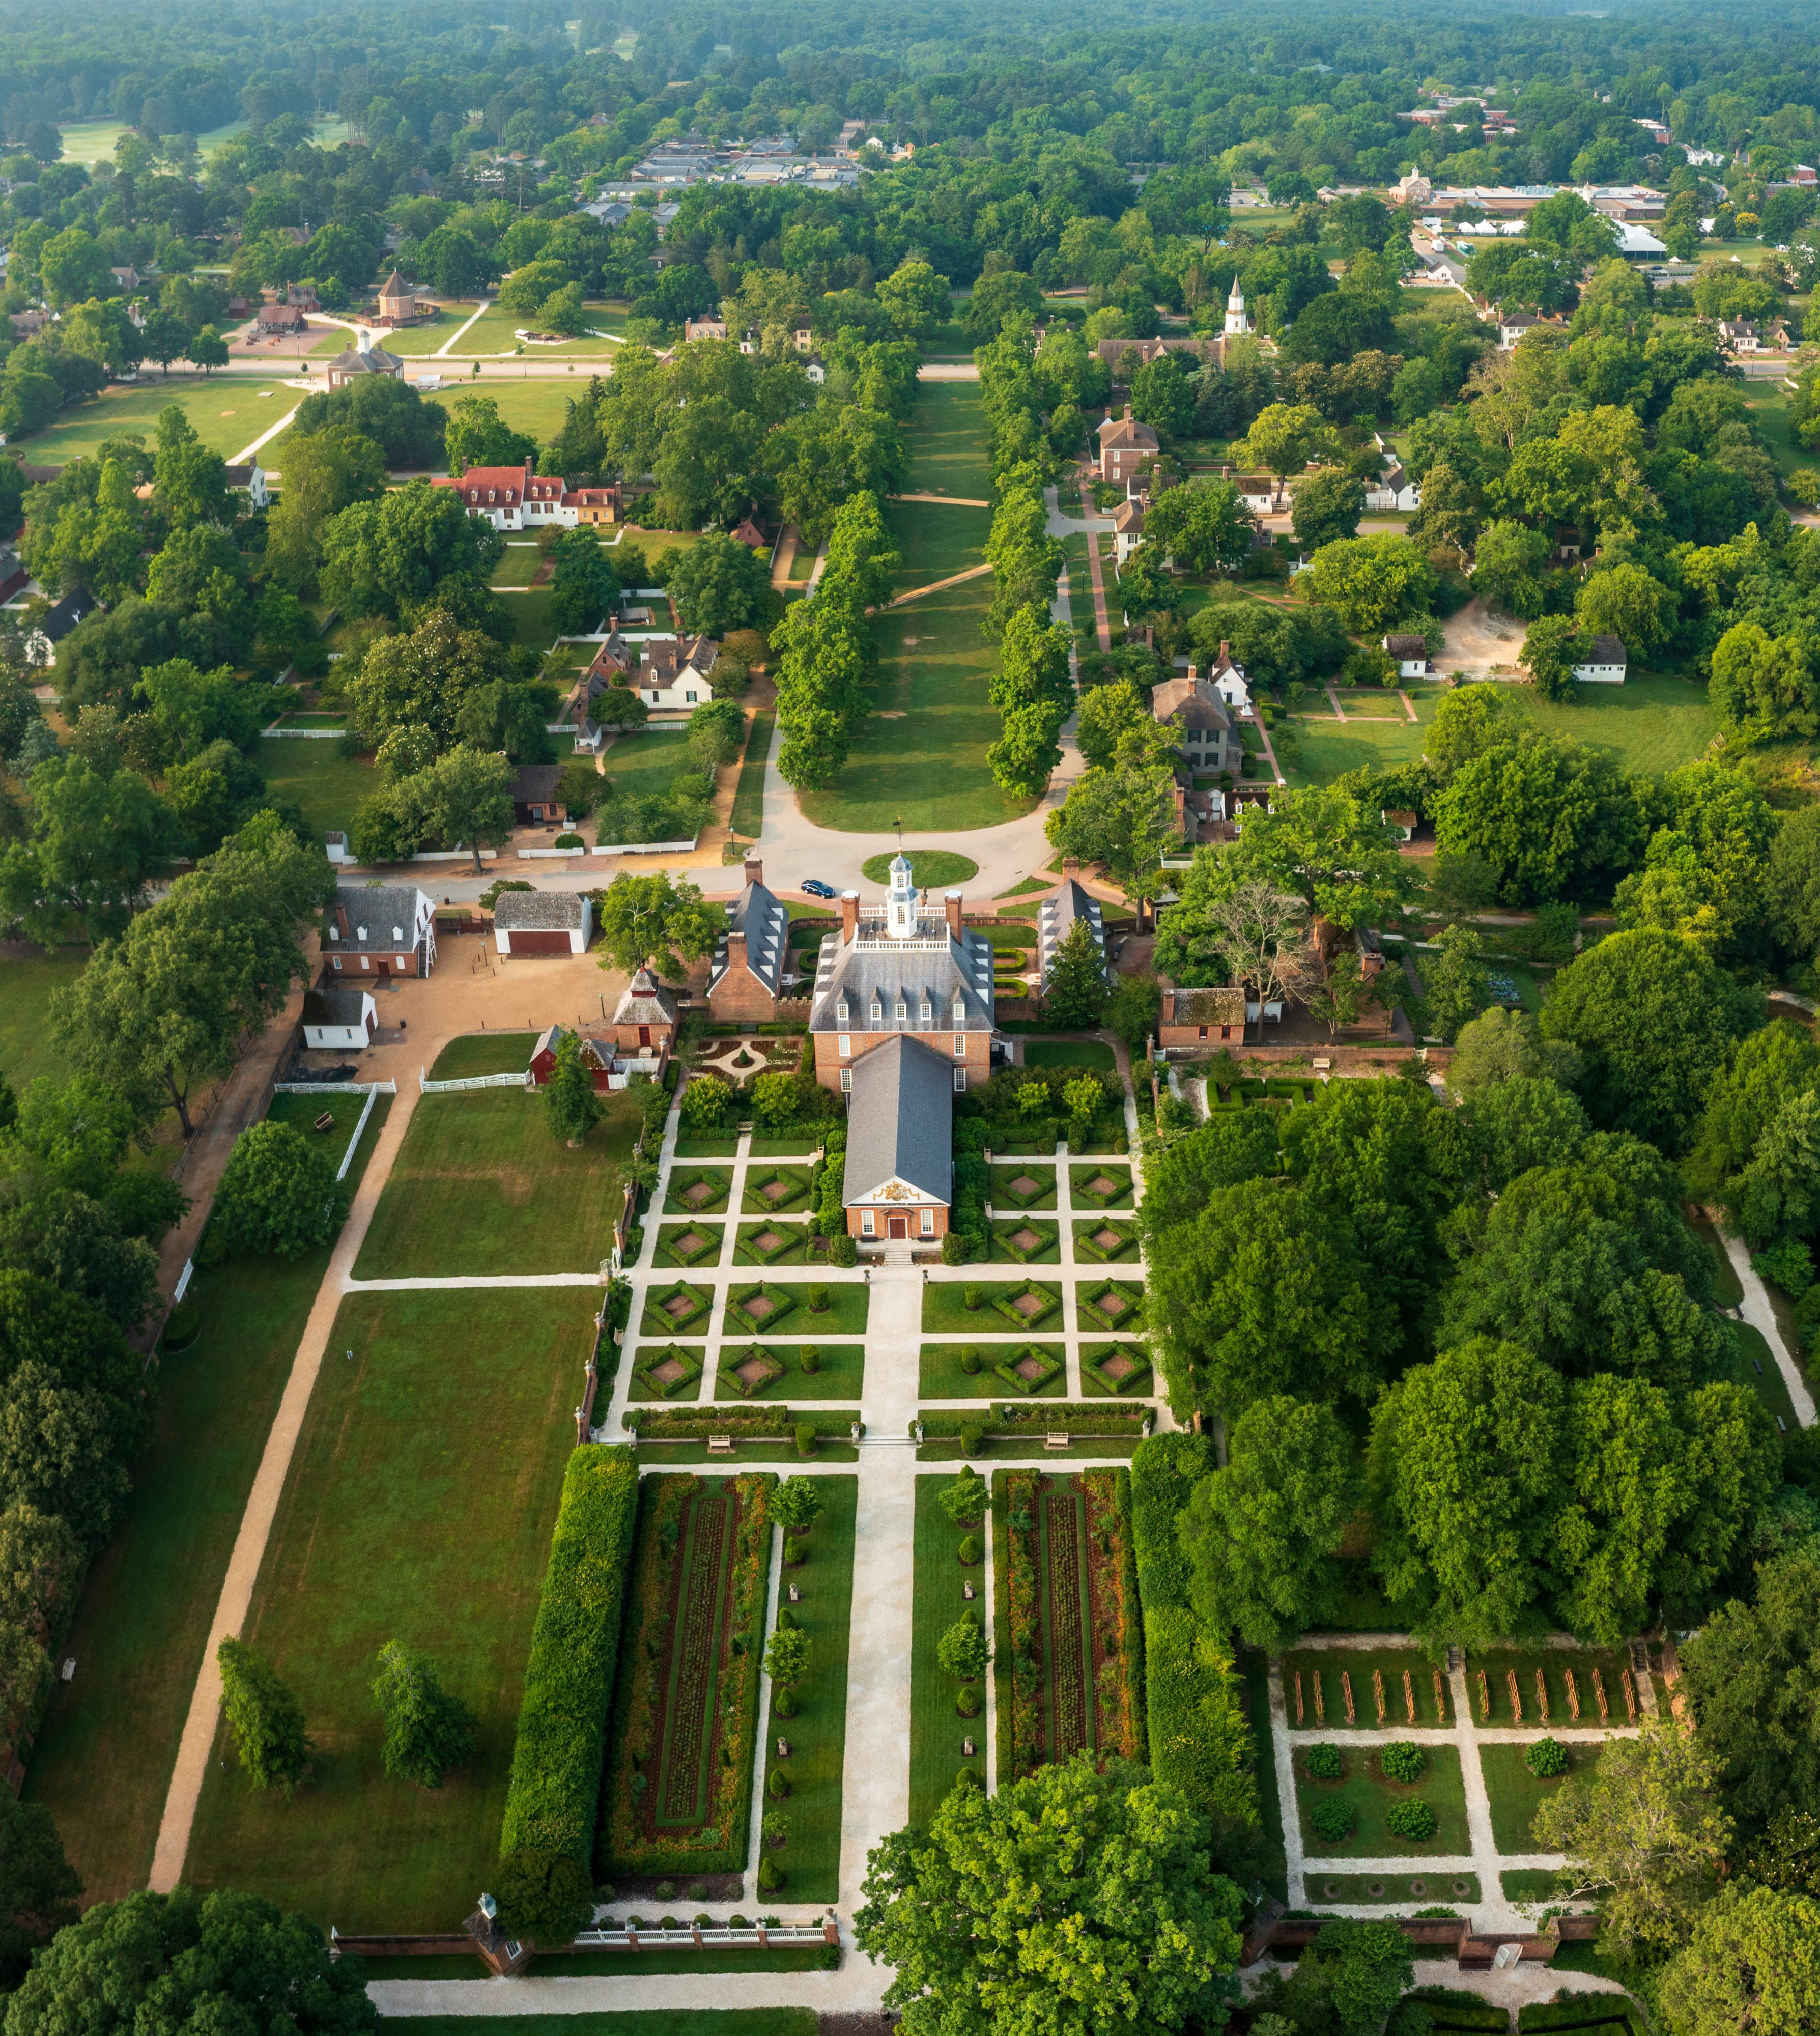 Aerial View of Governors Palace in Williamsburg, Virginia